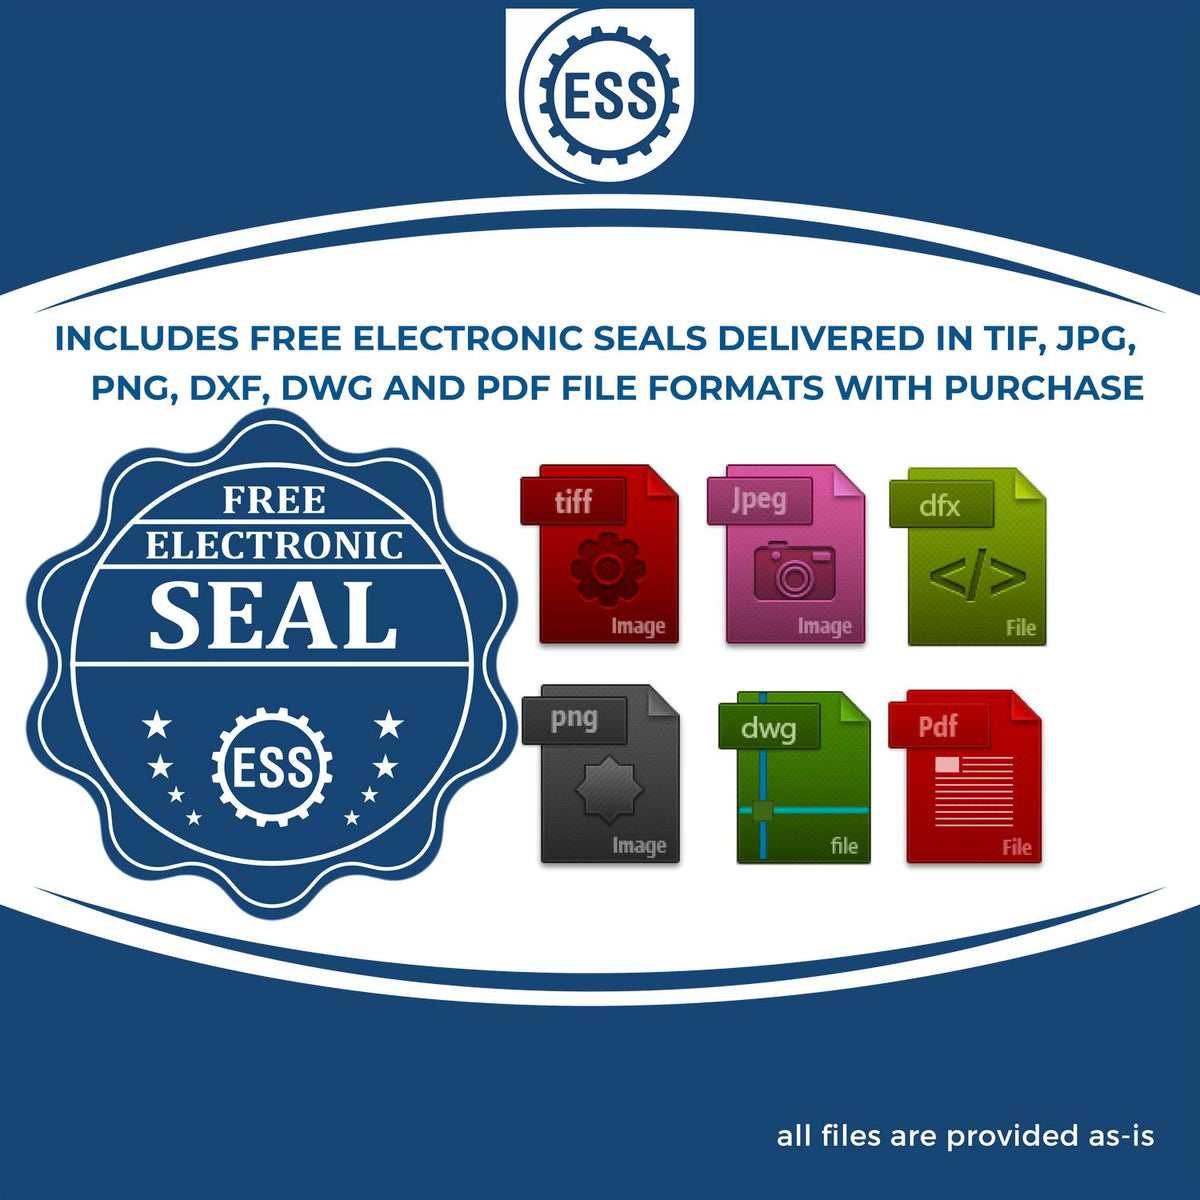 An infographic for the free electronic seal for the Nevada Geologist Desk Seal illustrating the different file type icons such as DXF, DWG, TIF, JPG and PNG.